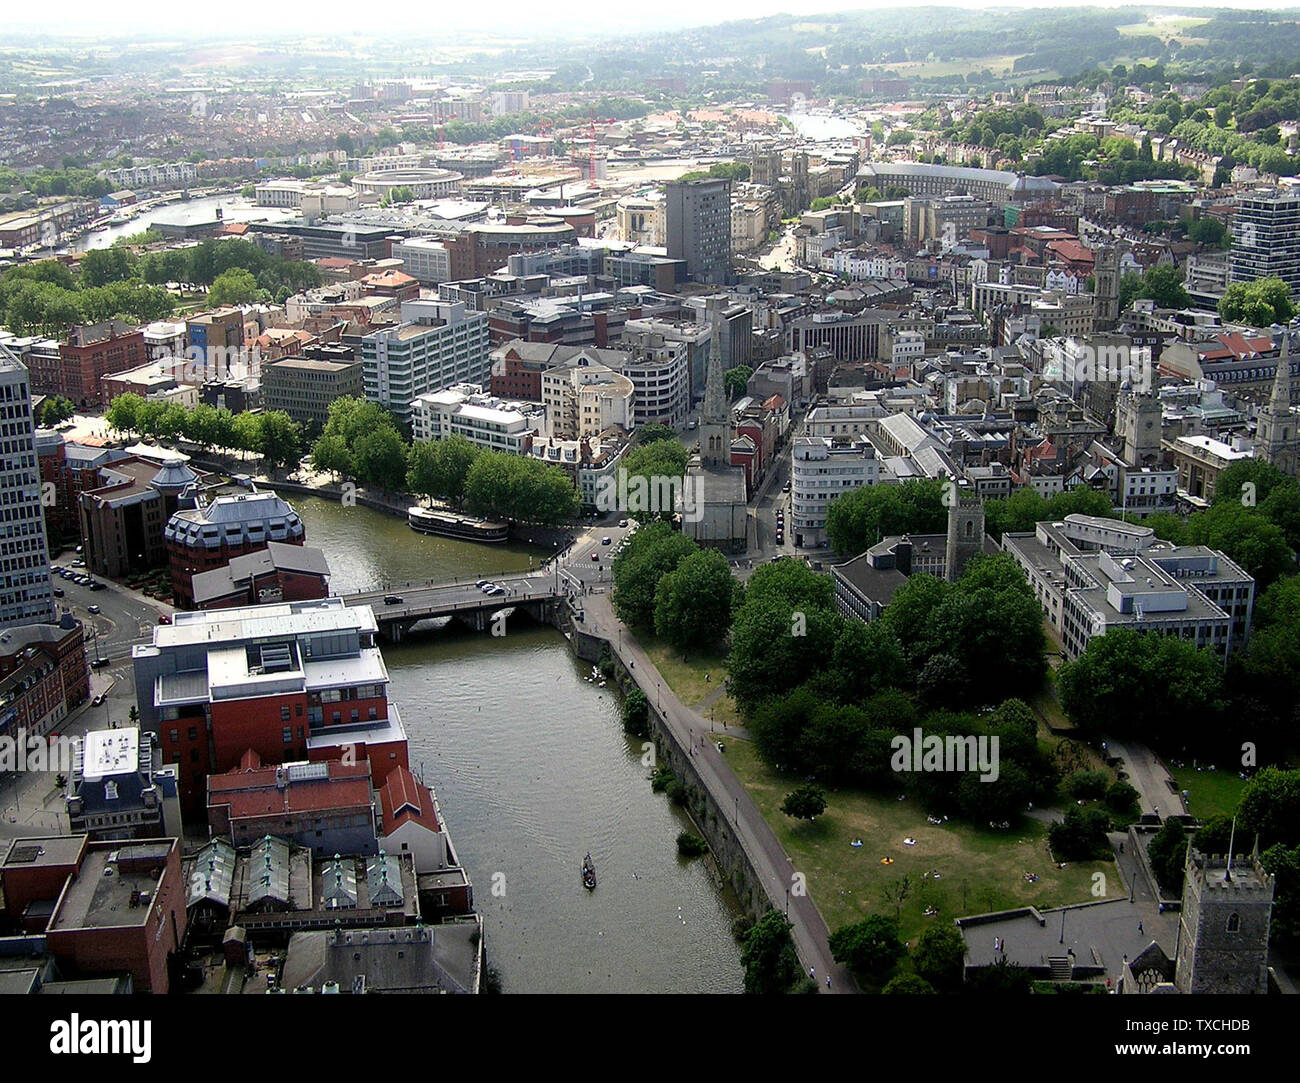 The River Avon flows through the centre of Bristol, England. Portions of the true river can also be seen top left, and towards the top of the picture at centre right Centre left is Bristol Bridge, with four cars on it. In the bottom left corner are the red-tiled roofs of the former Georges Brewery, bordering the river. The buildings are now flats. Bottom right is the greenery  of Castle Park with people sunbathing. The hills at top right include Ashton Park where the Bristol Balloon Fiesta is held. The picture was taken from a tethered passenger balloon, 500 feet up.; 16 July 2005; Photograph Stock Photo